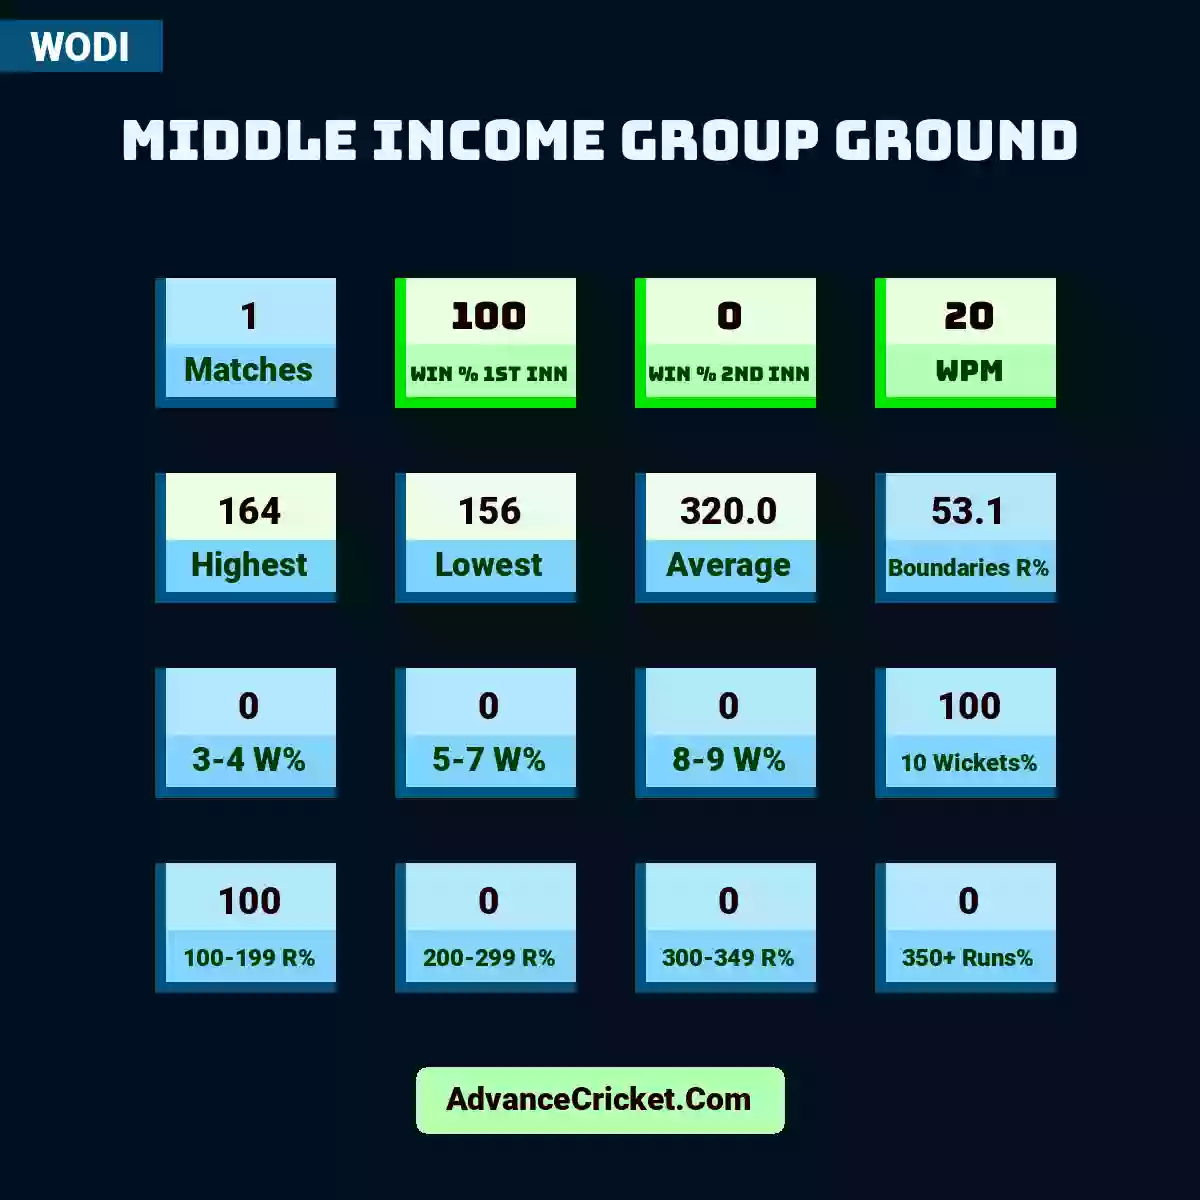 Image showing Middle Income Group Ground with Matches: 1, Win % 1st Inn: 100, Win % 2nd Inn: 0, WPM: 20, Highest: 164, Lowest: 156, Average: 320.0, Boundaries R%: 53.1, 3-4 W%: 0, 5-7 W%: 0, 8-9 W%: 0, 10 Wickets%: 100, 100-199 R%: 100, 200-299 R%: 0, 300-349 R%: 0, 350+ Runs%: 0.